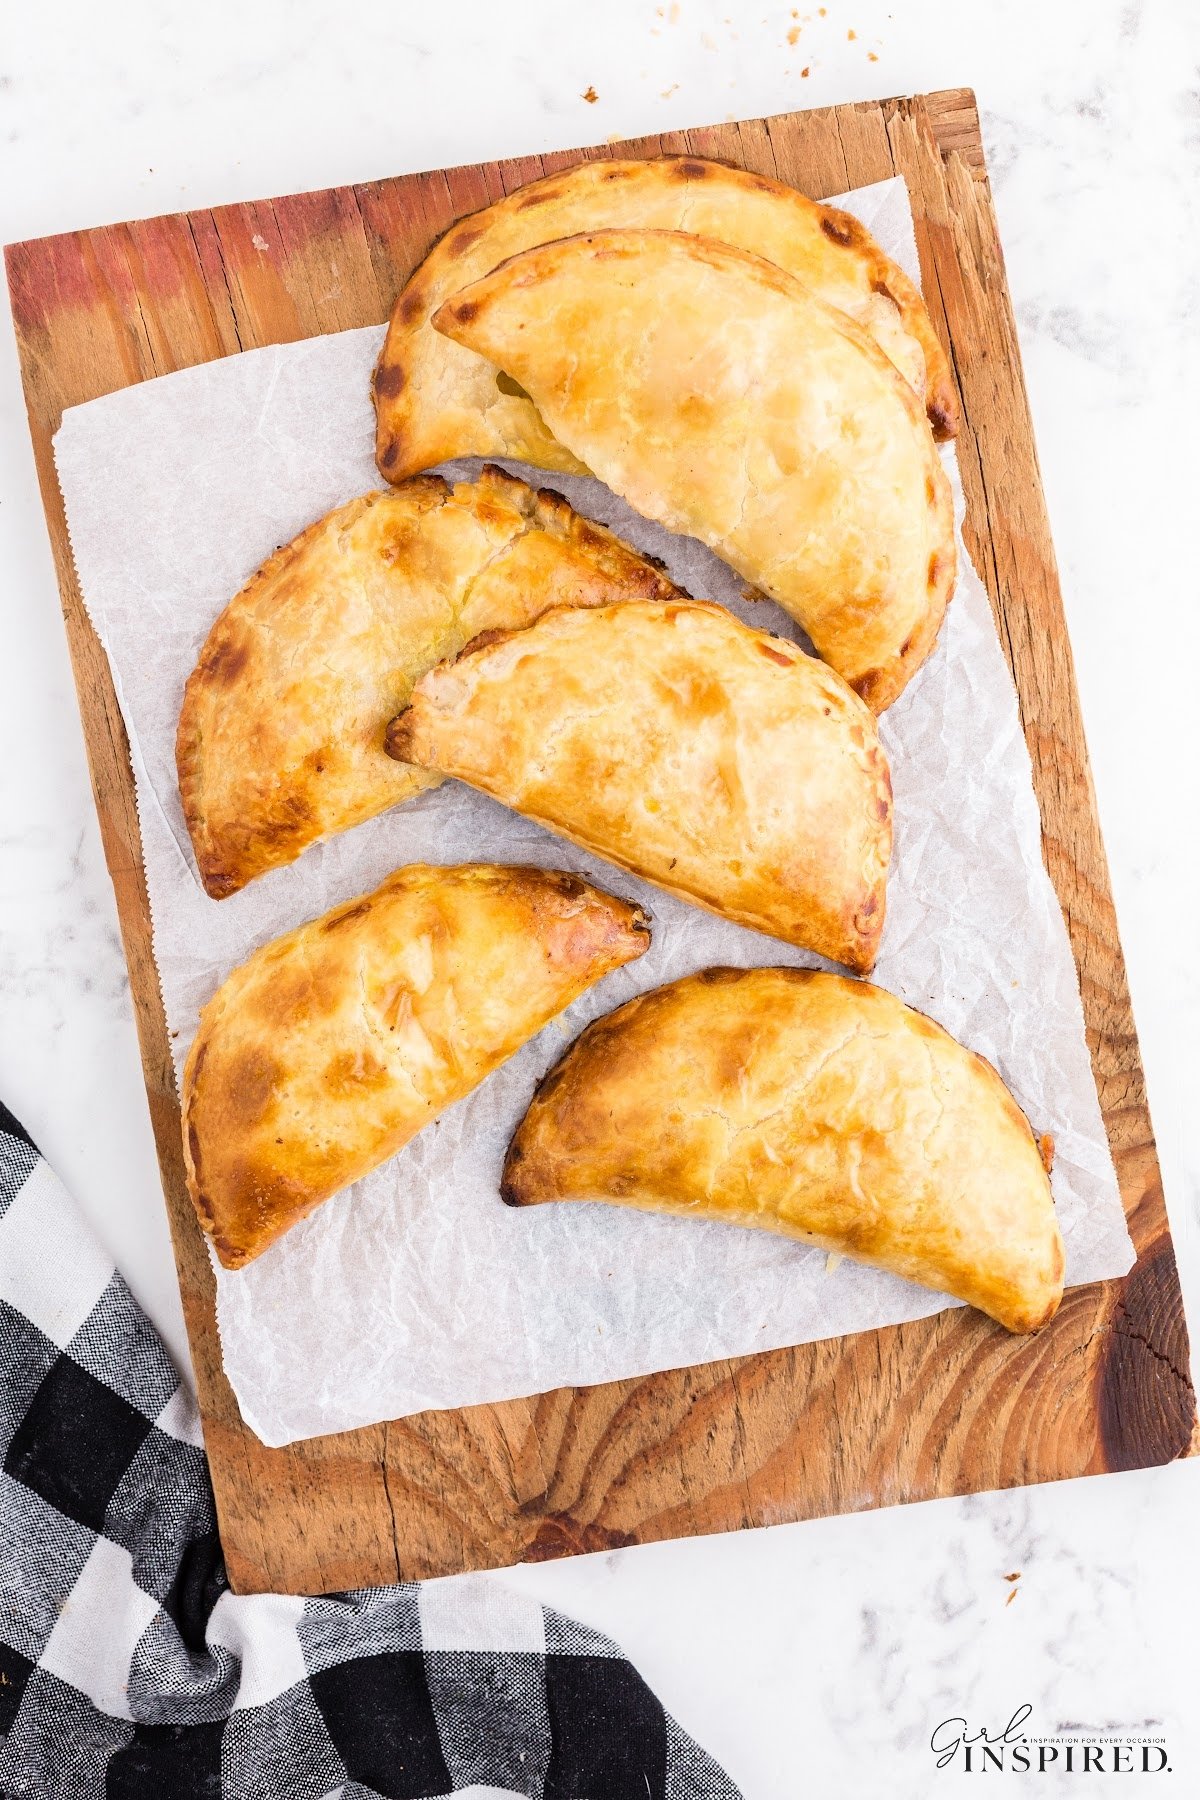 Six Chicken Pot Pie Hand Pies on a wooden kitchen board lined with parchment paper and a checkered cloth on the countertop.